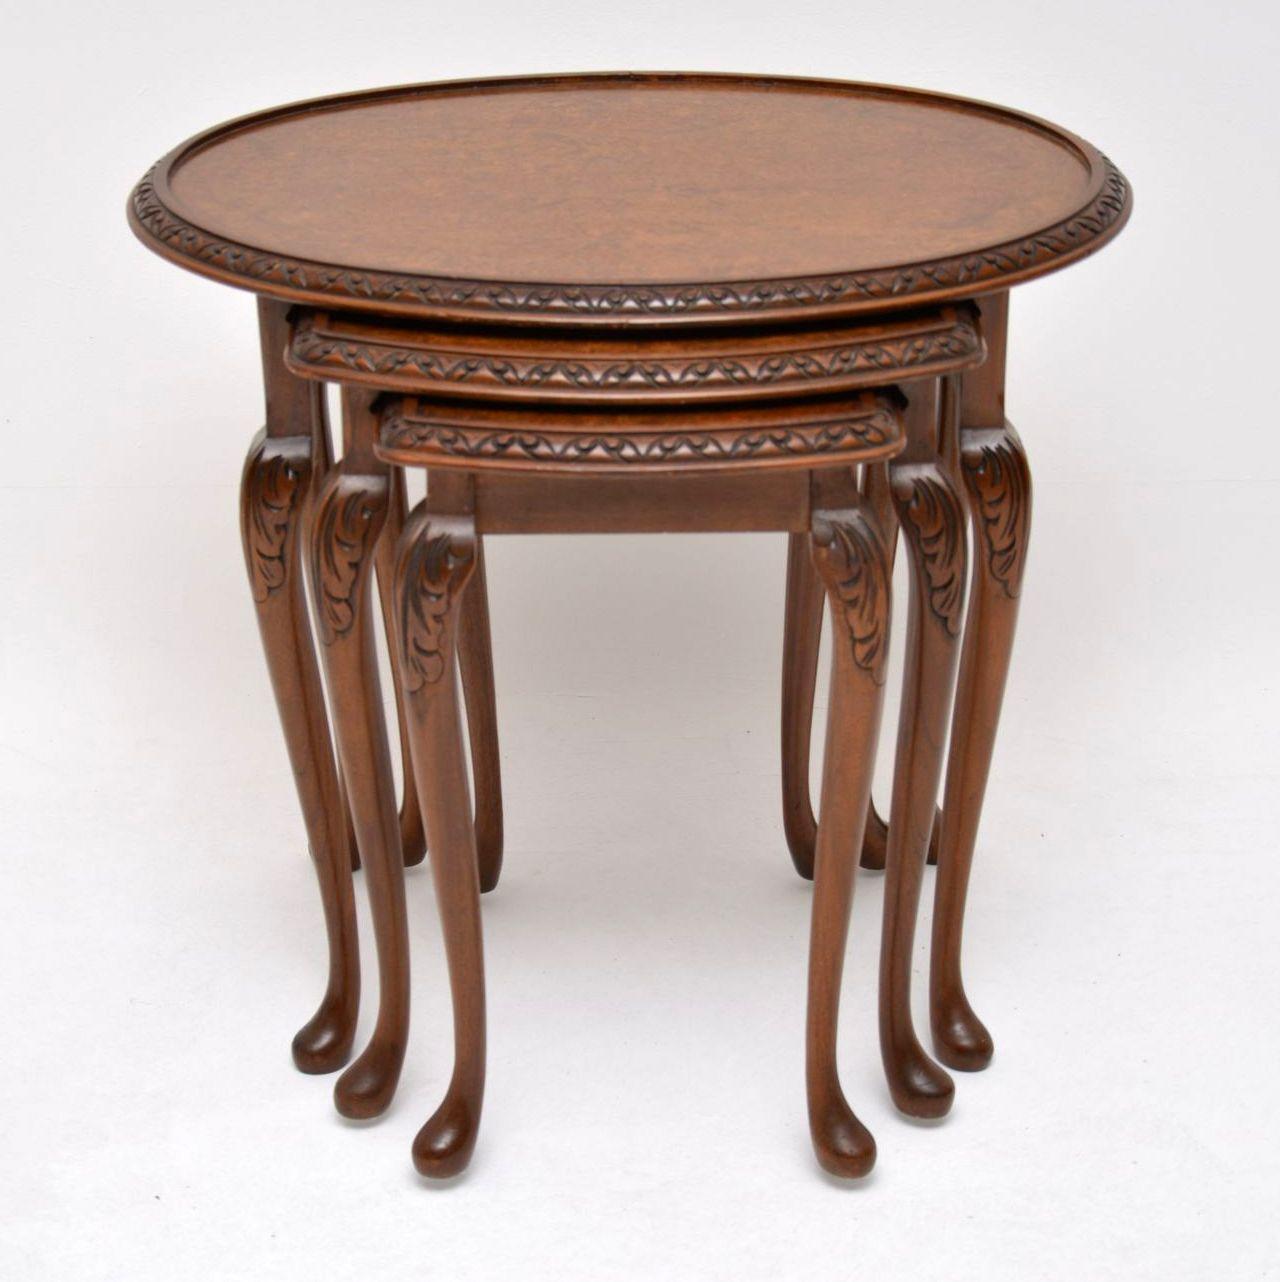 Antique Queen Anne style walnut nest of tables, dating from circa 1930s period and in excellent condition. The table tops are a tight burr walnut and have carved edges. Each tabletop has a different shape and the smallest one is quite deep. The